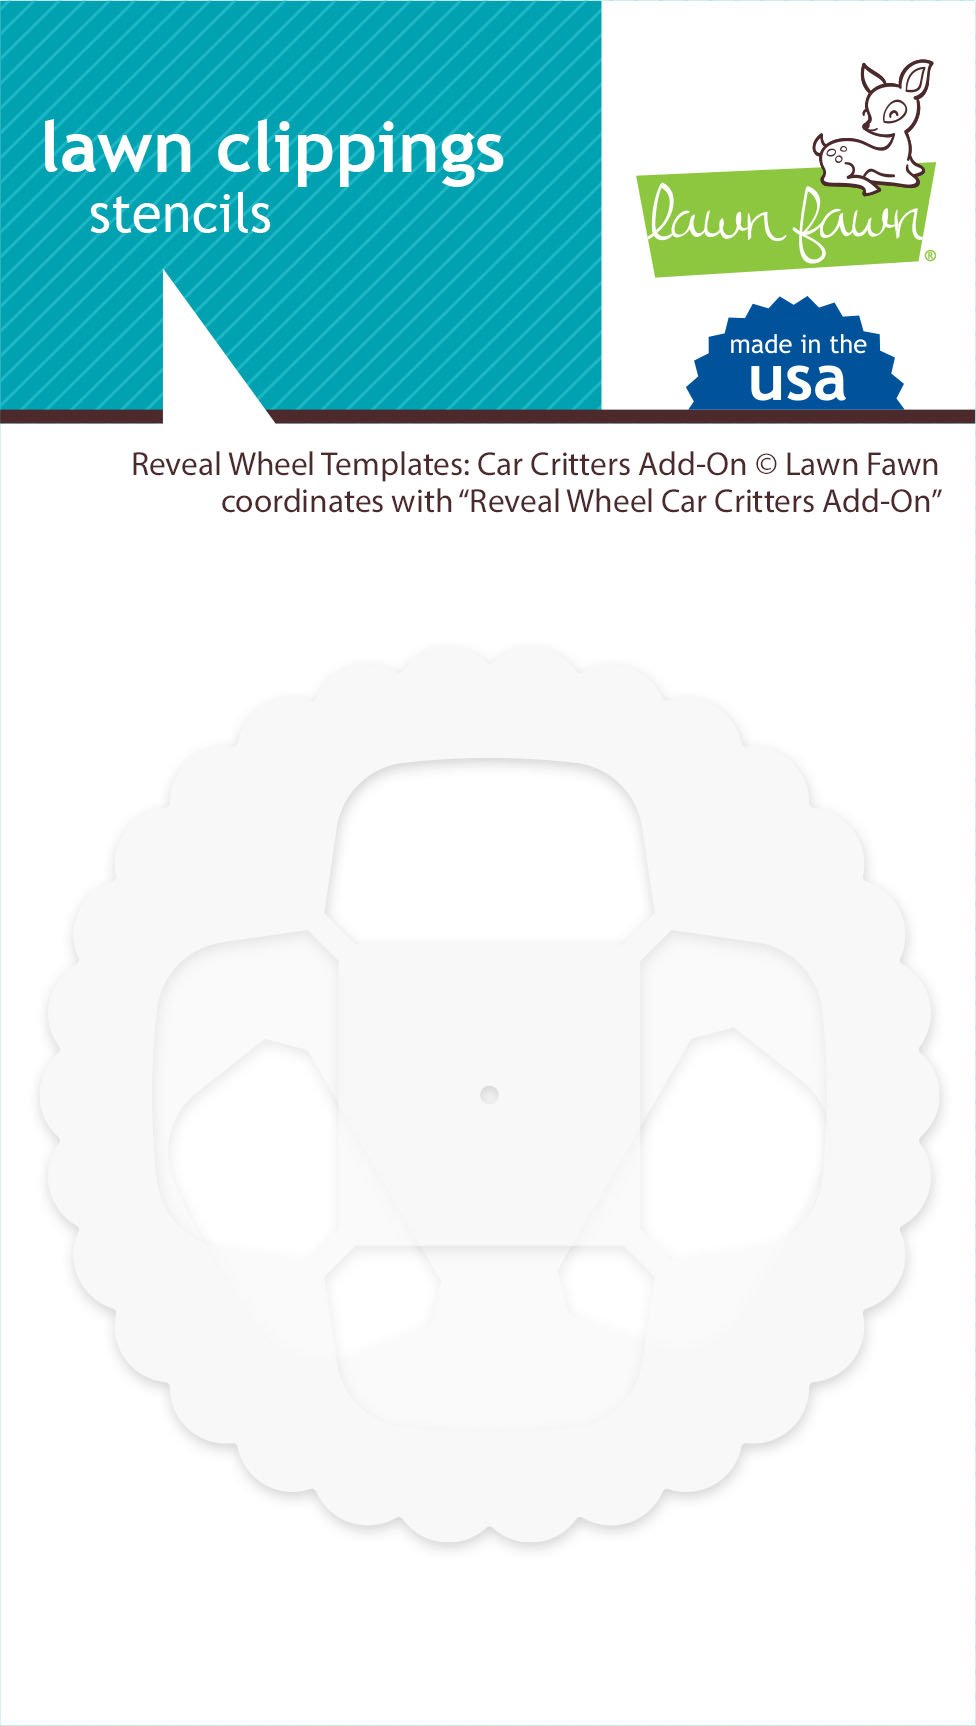 Reveal wheel templates: car critters